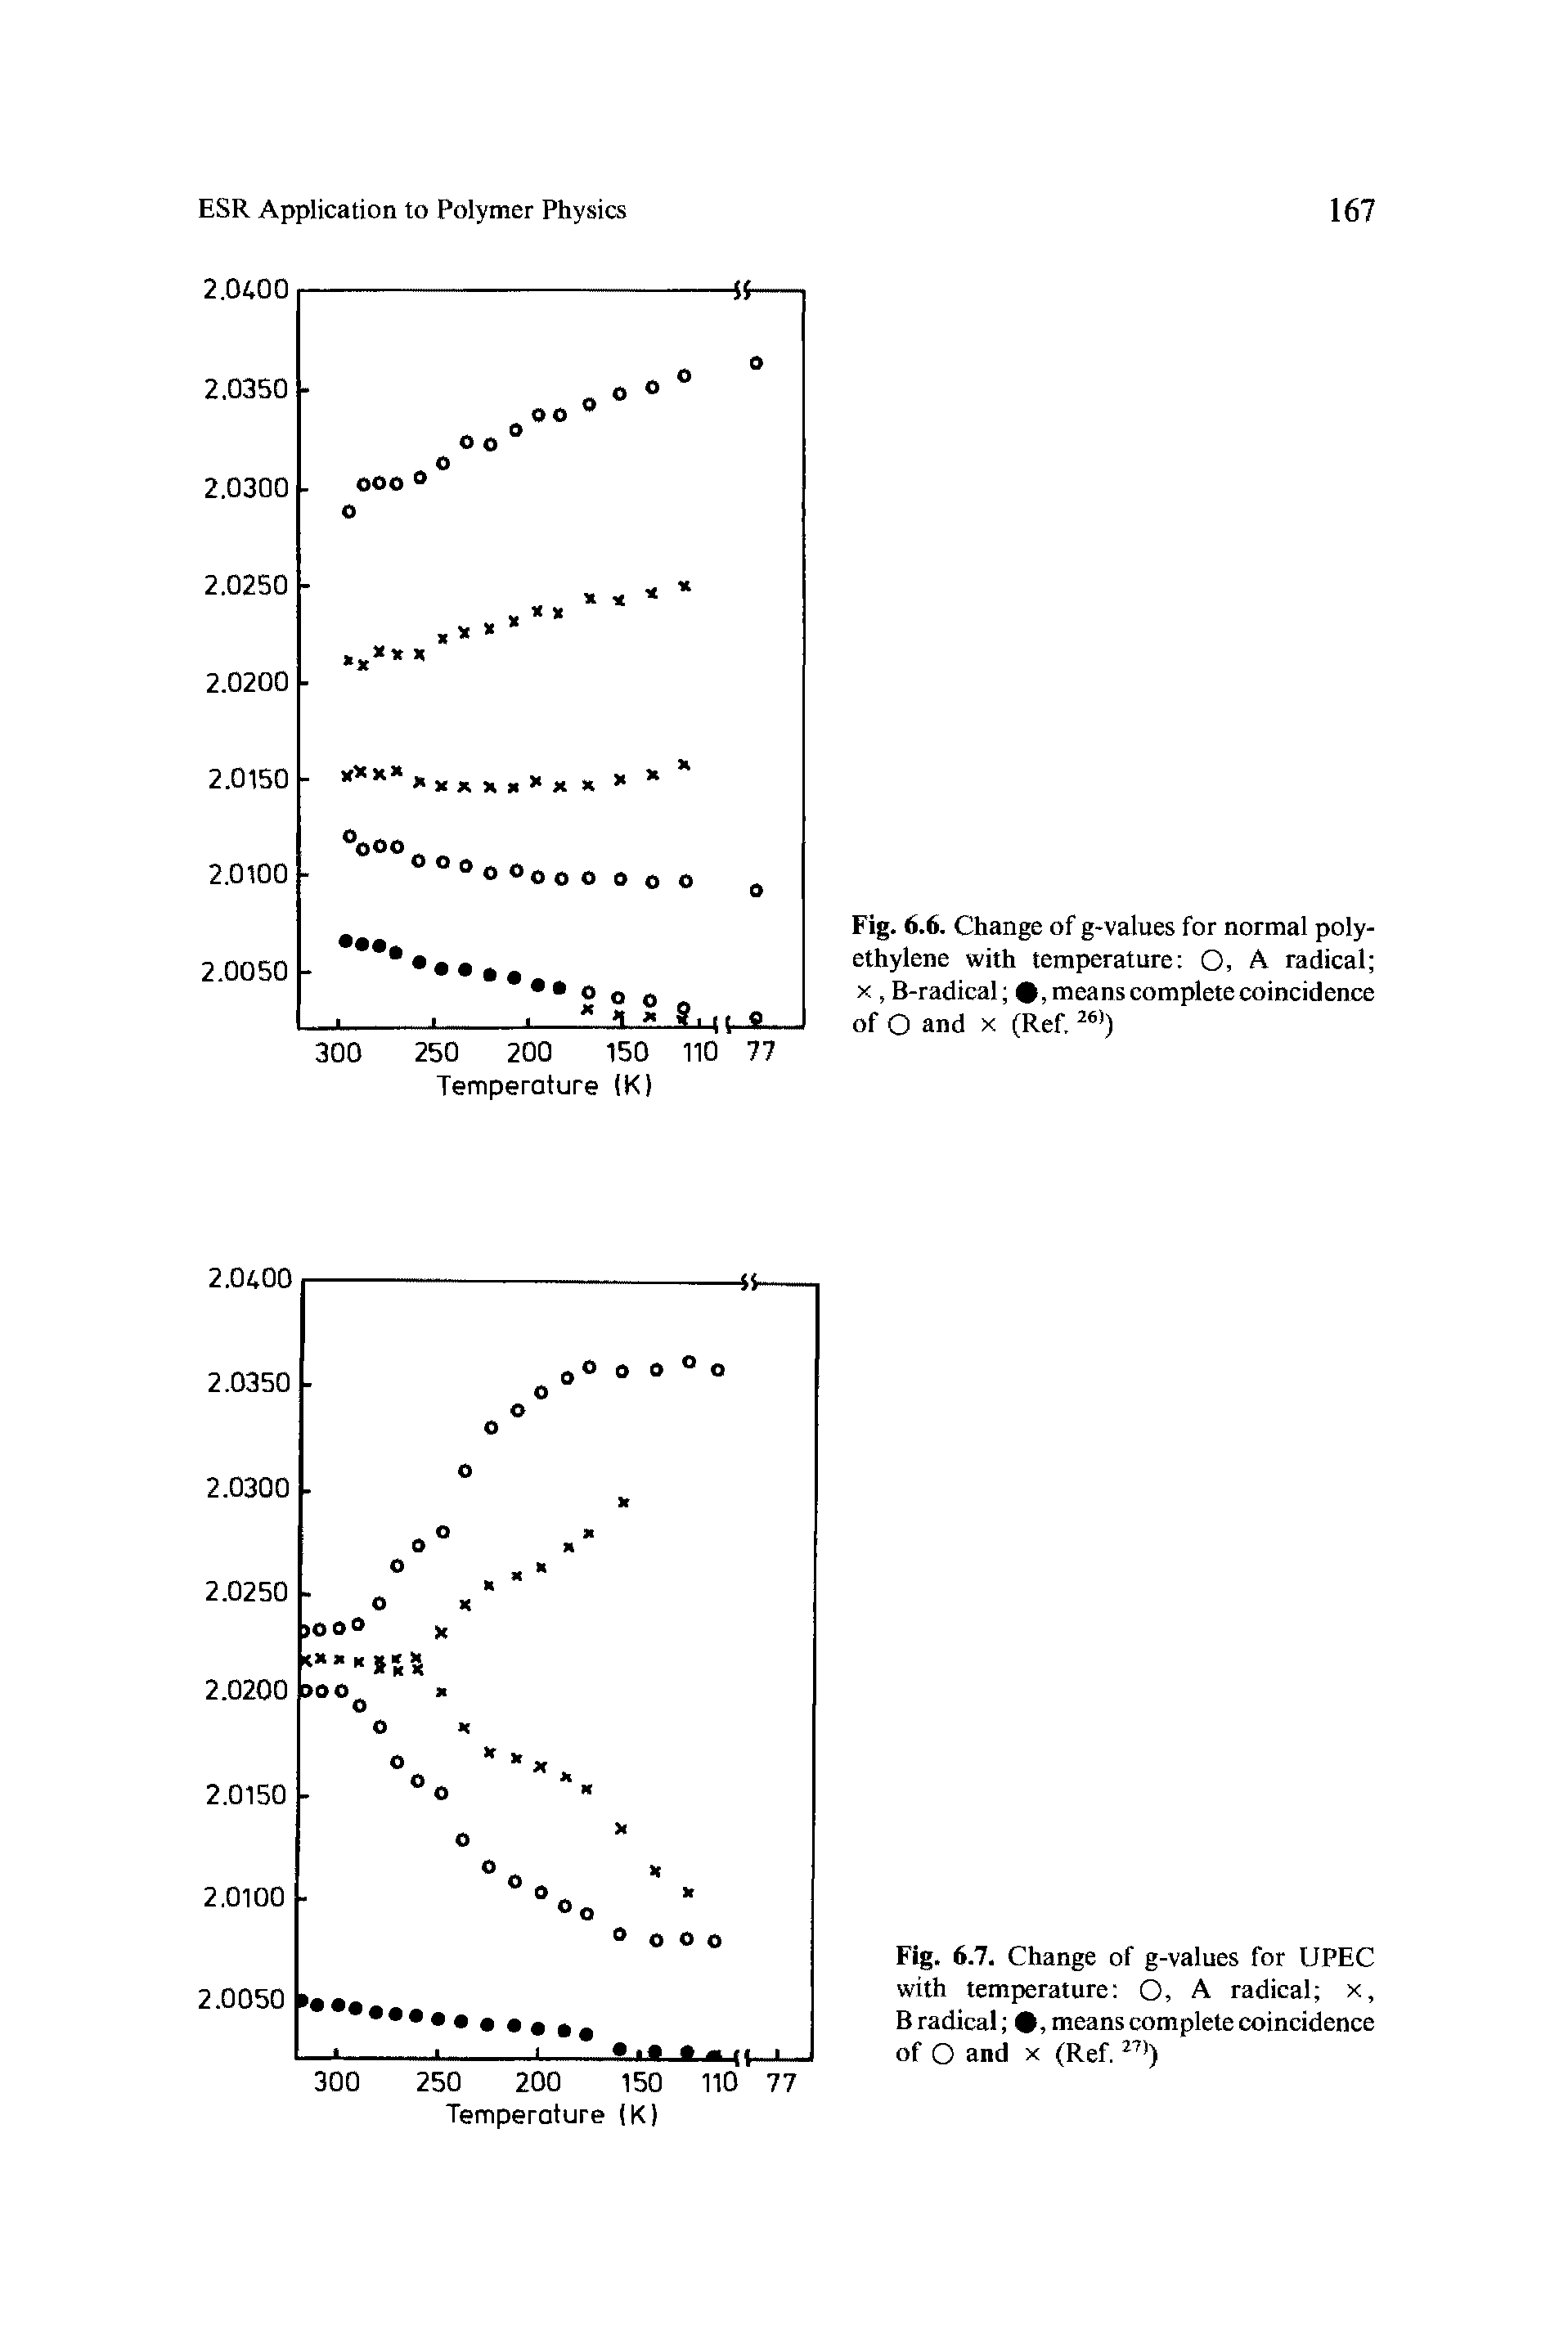 Fig. 6.6. Change of g-values for normal polyethylene with temperature O, A radical X, B-radical , meanscompletecoincidence of O and X (Ref,...